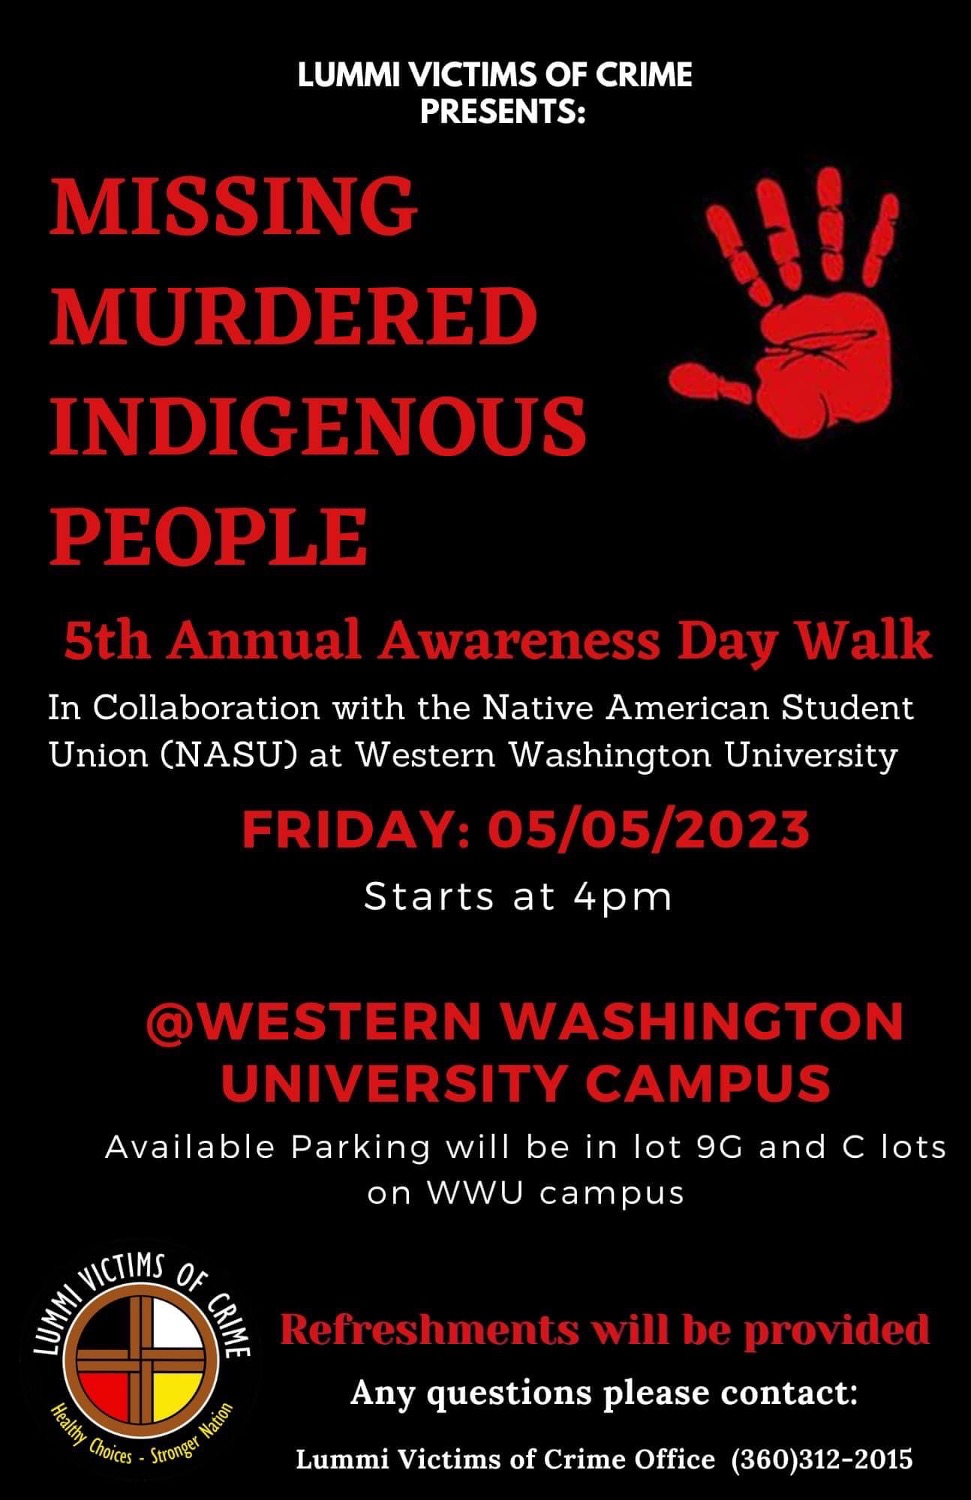 Missing Murdered Indigenous People in red text next to a red hand print. This is a poster used to advertise the walk.